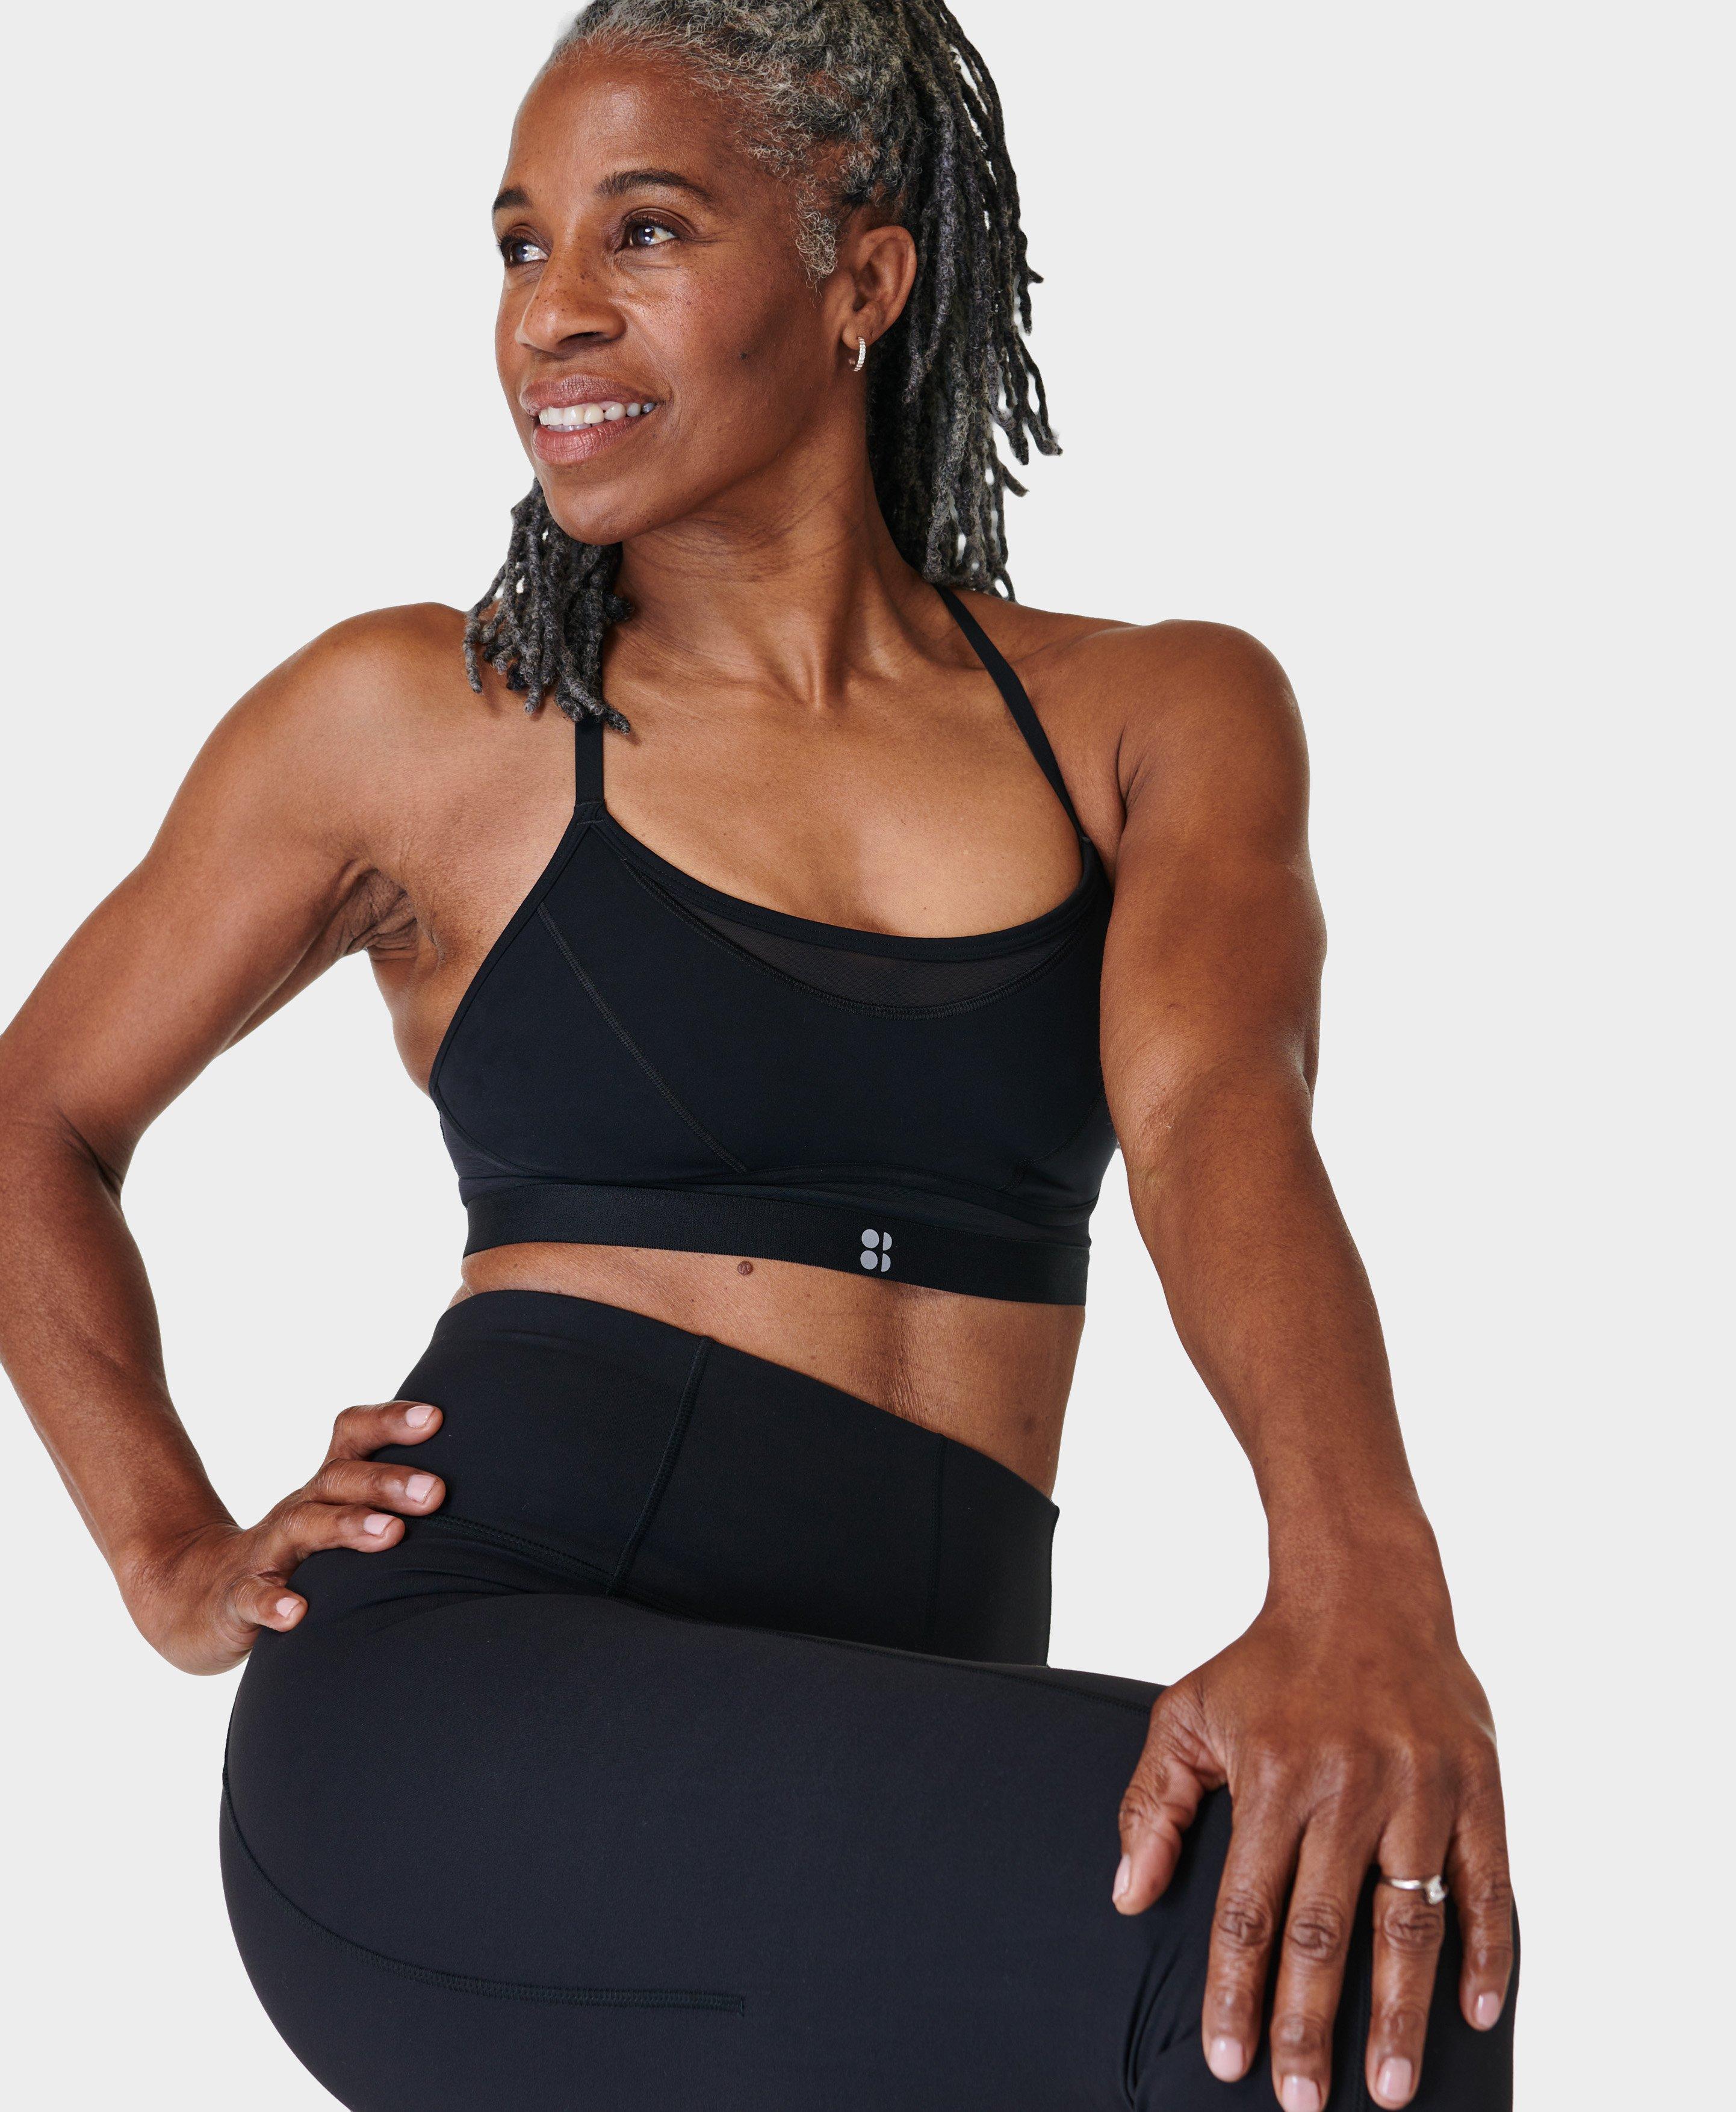 Sweaty Betty's New Power Icon Sports Bras Are What Active Girls